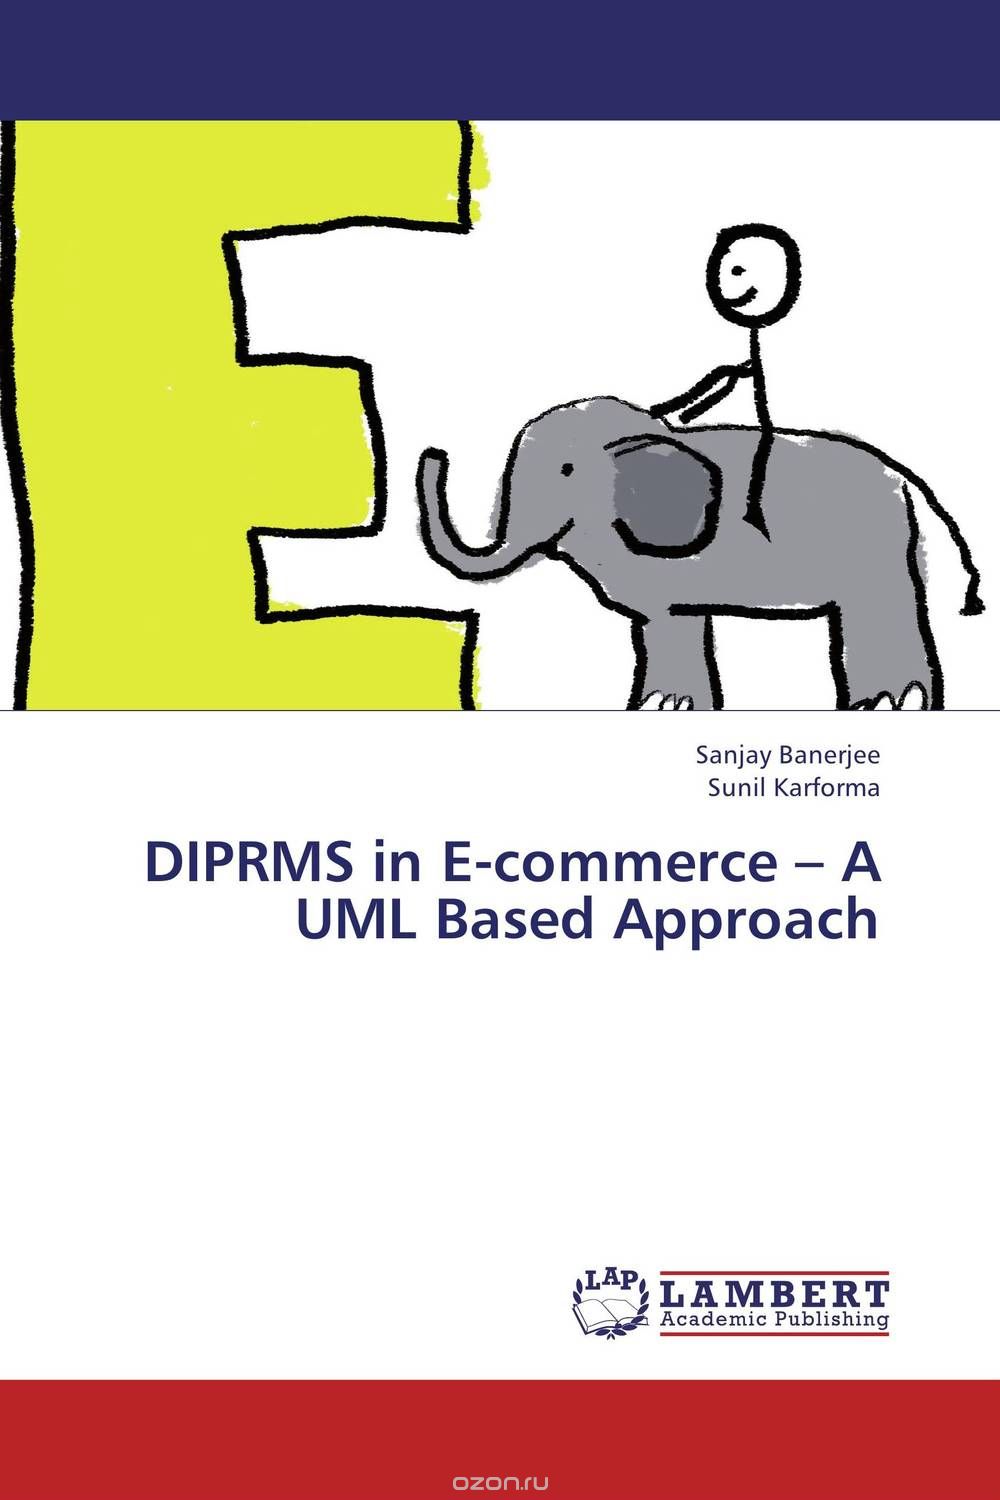 DIPRMS in E-commerce – A UML Based Approach